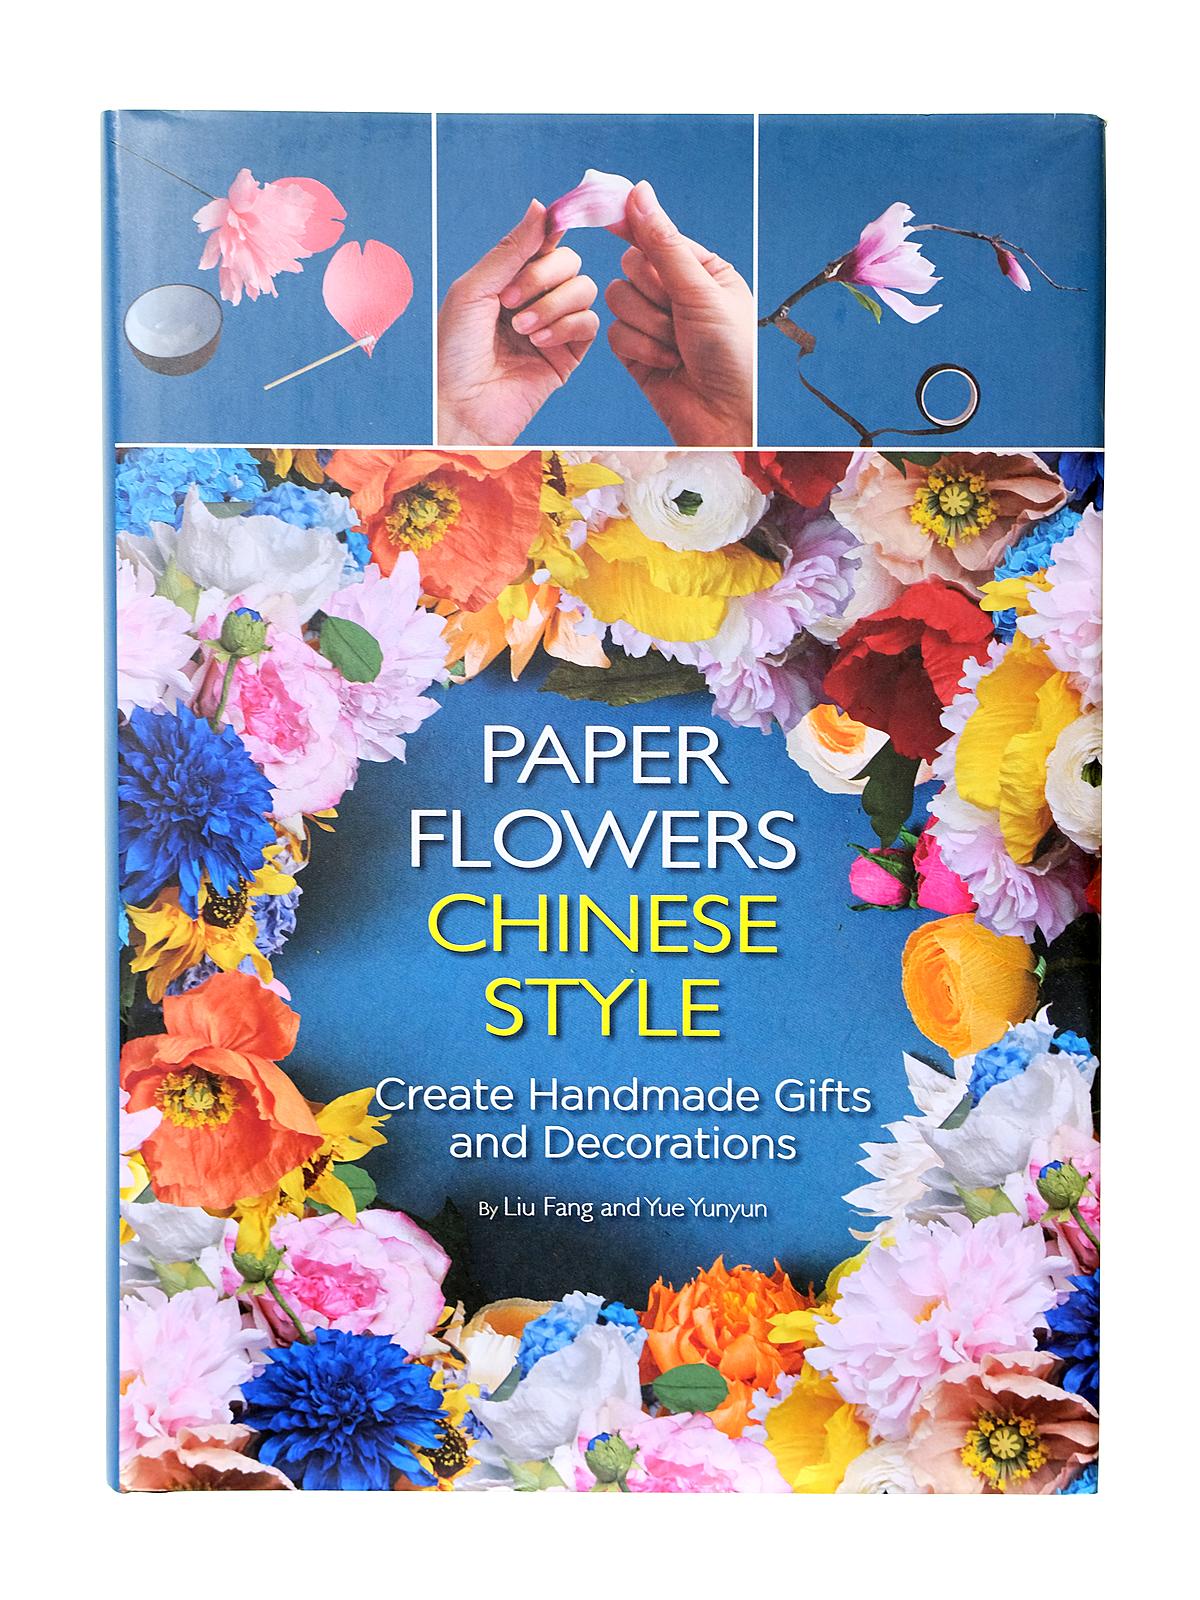 Paper Flowers Chinese Style each